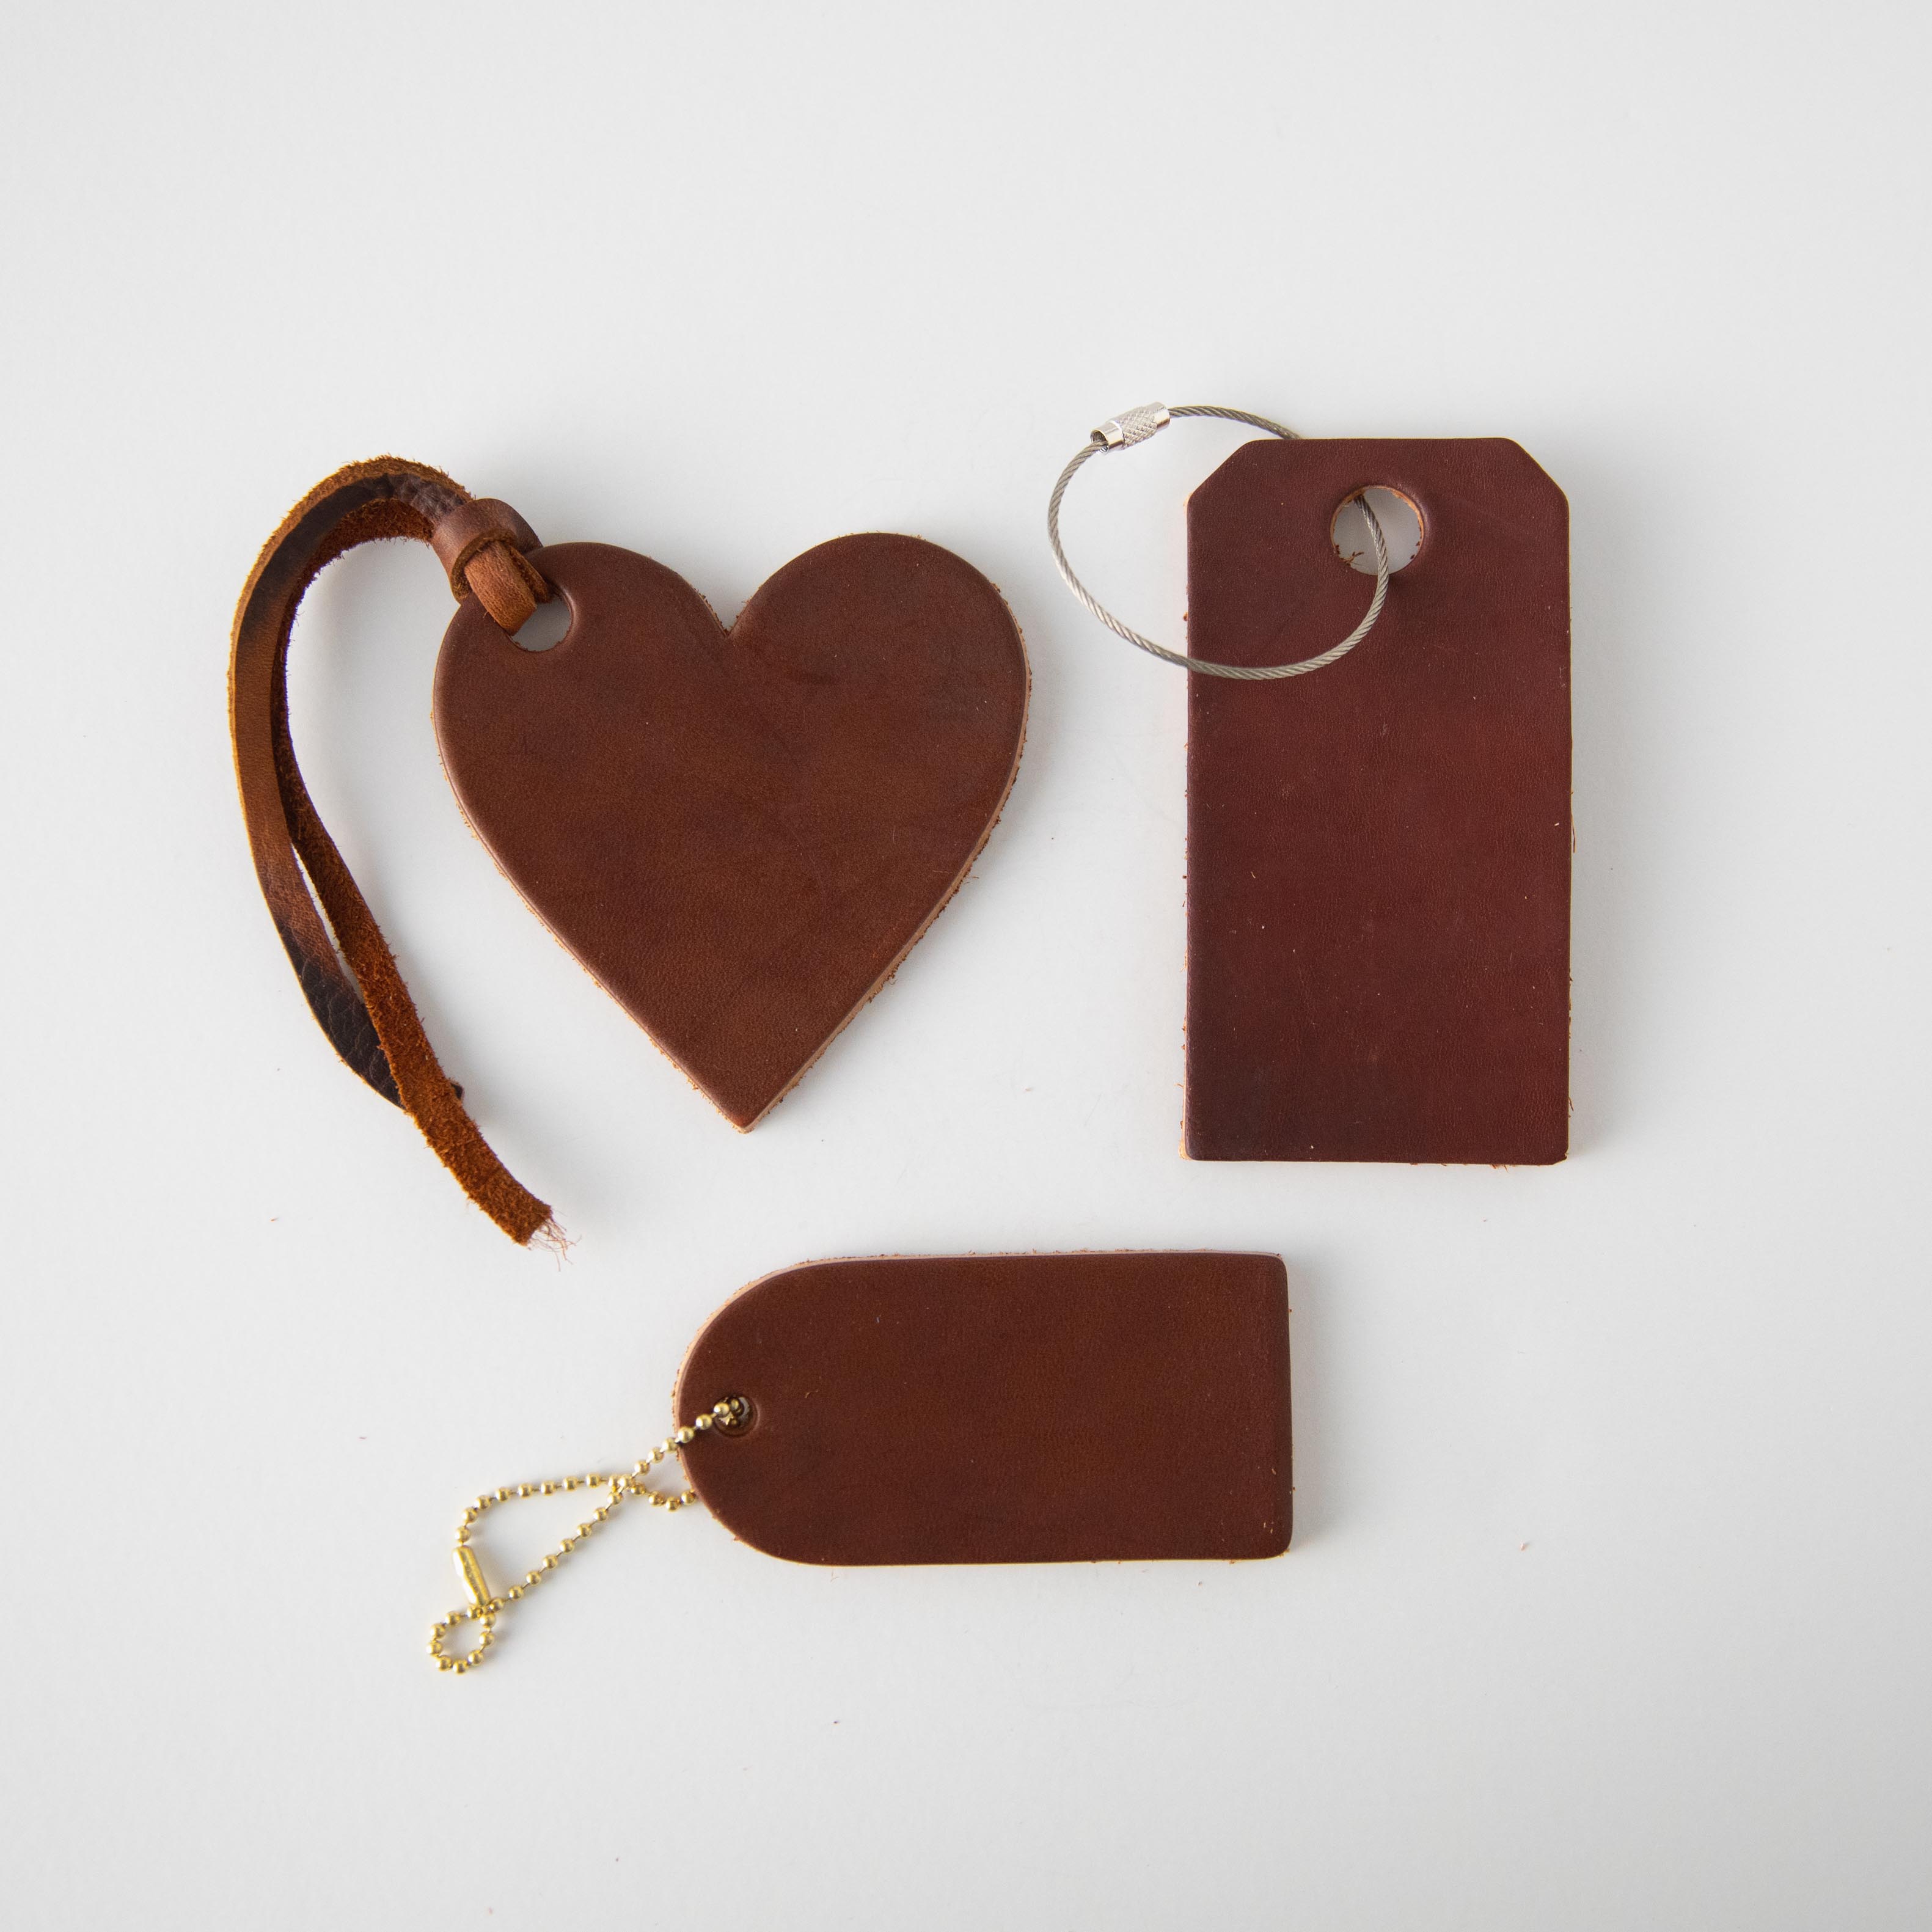 Personalised Leather Passport Cover and Luggage Tag Set -  Canada